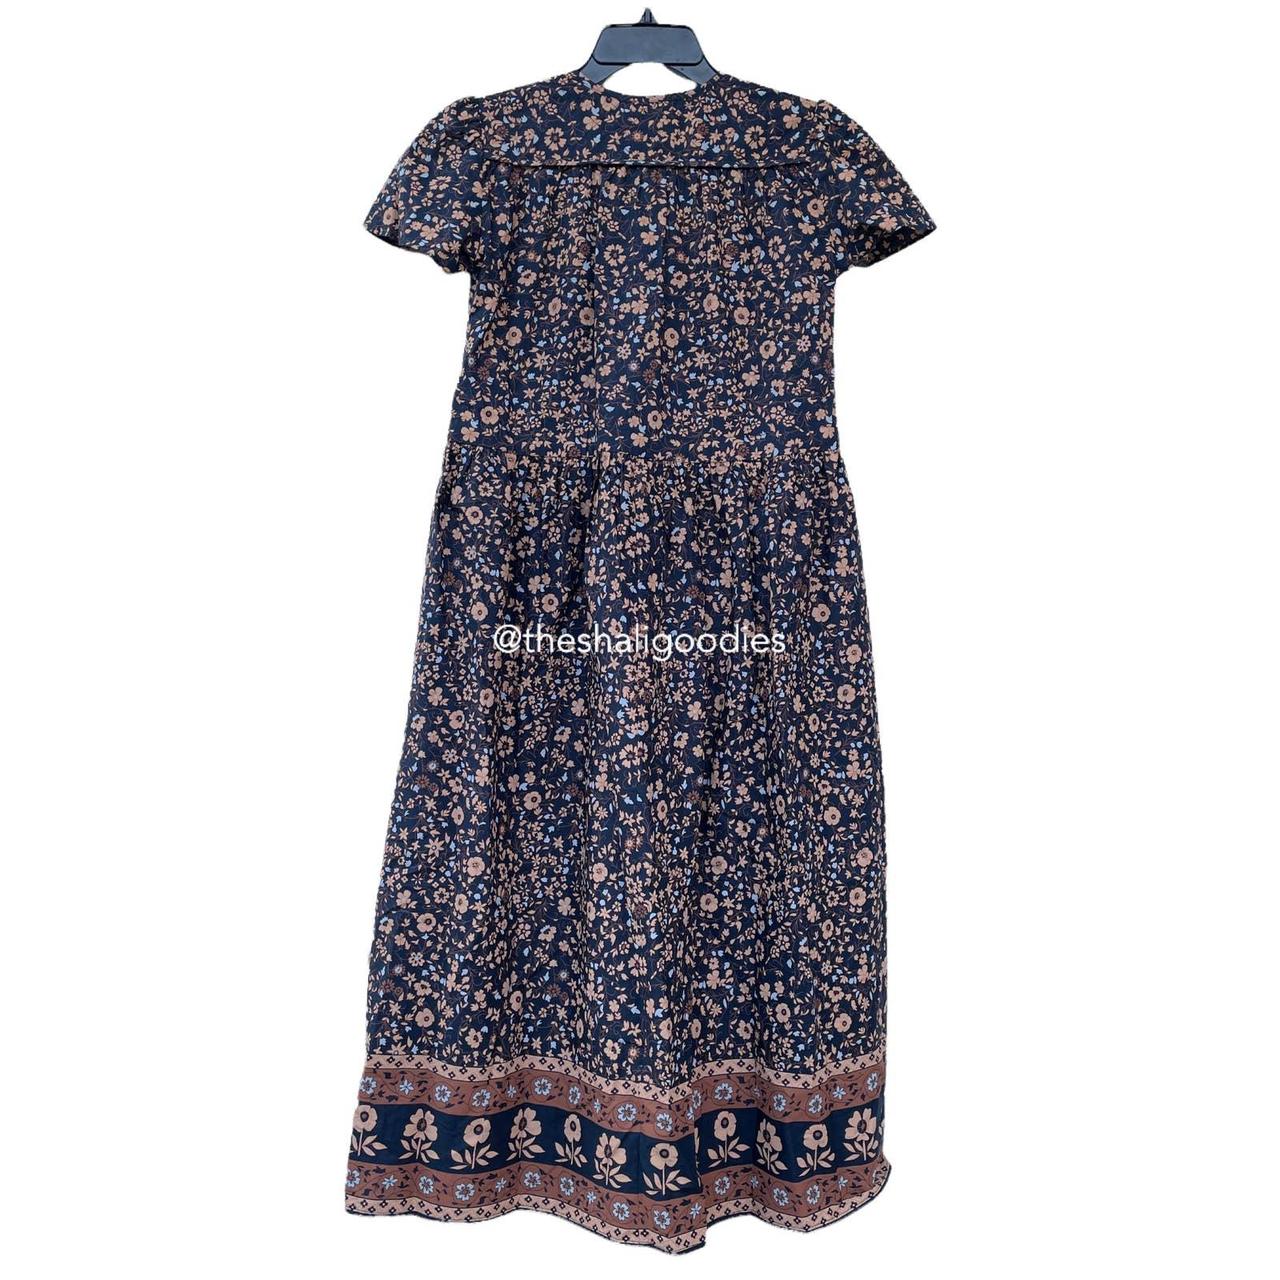 Product Image 2 - CHRISTY DAWN The Dawn Dress

*Very